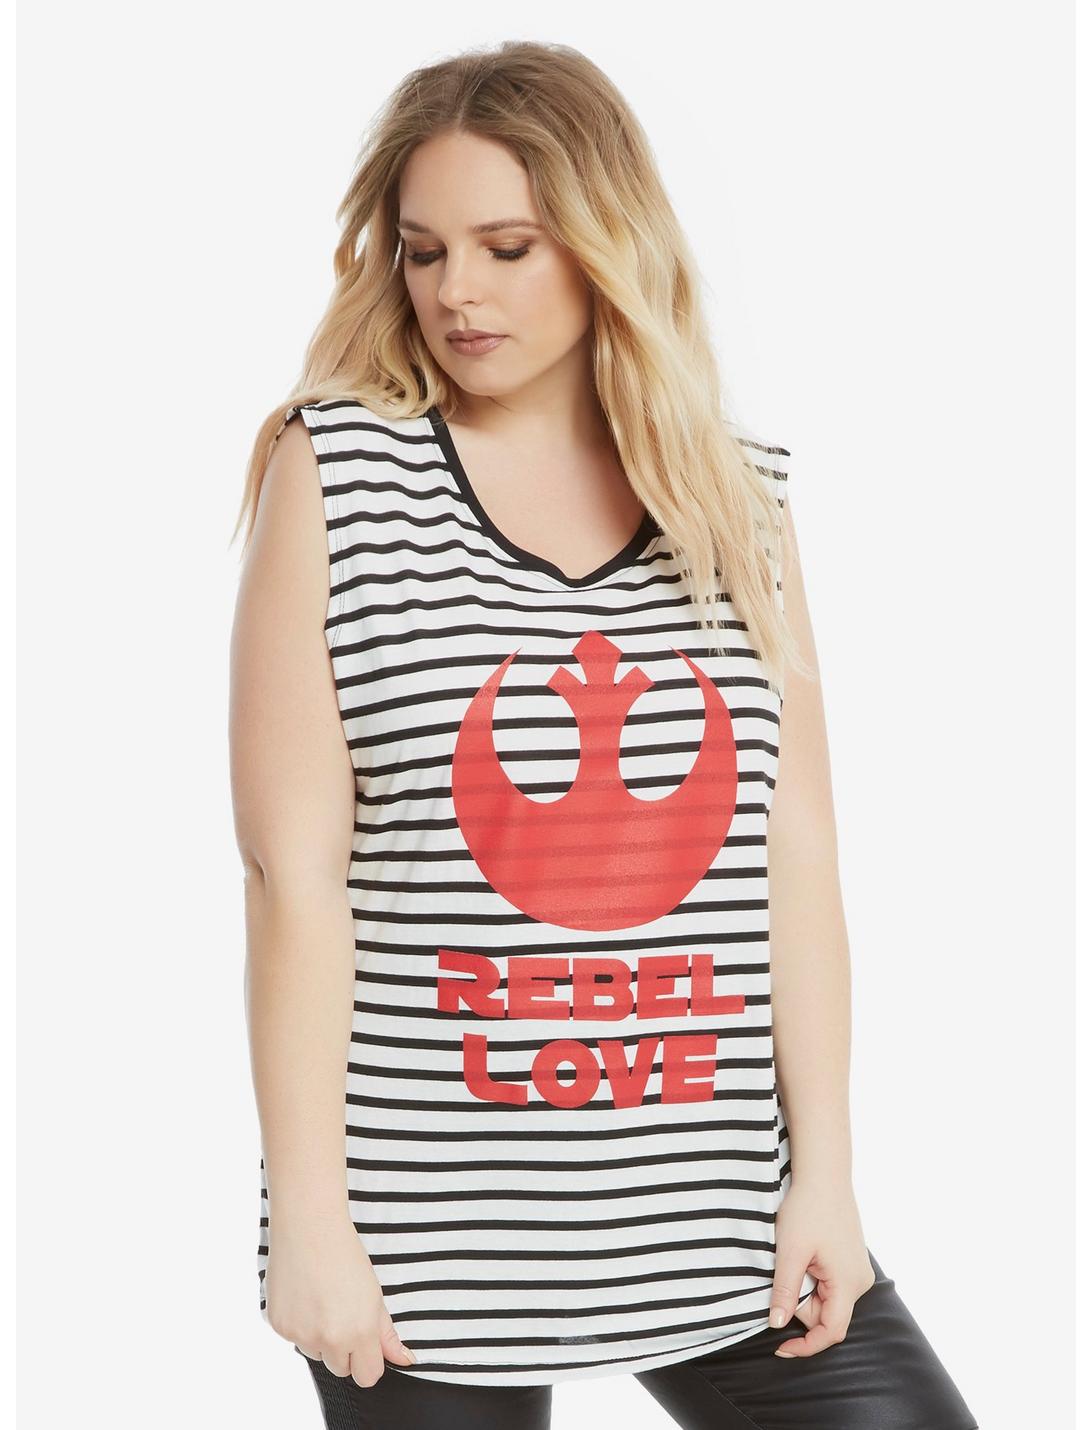 Star Wars Rebel Love Striped Muscle Top Extended Size, , hi-res